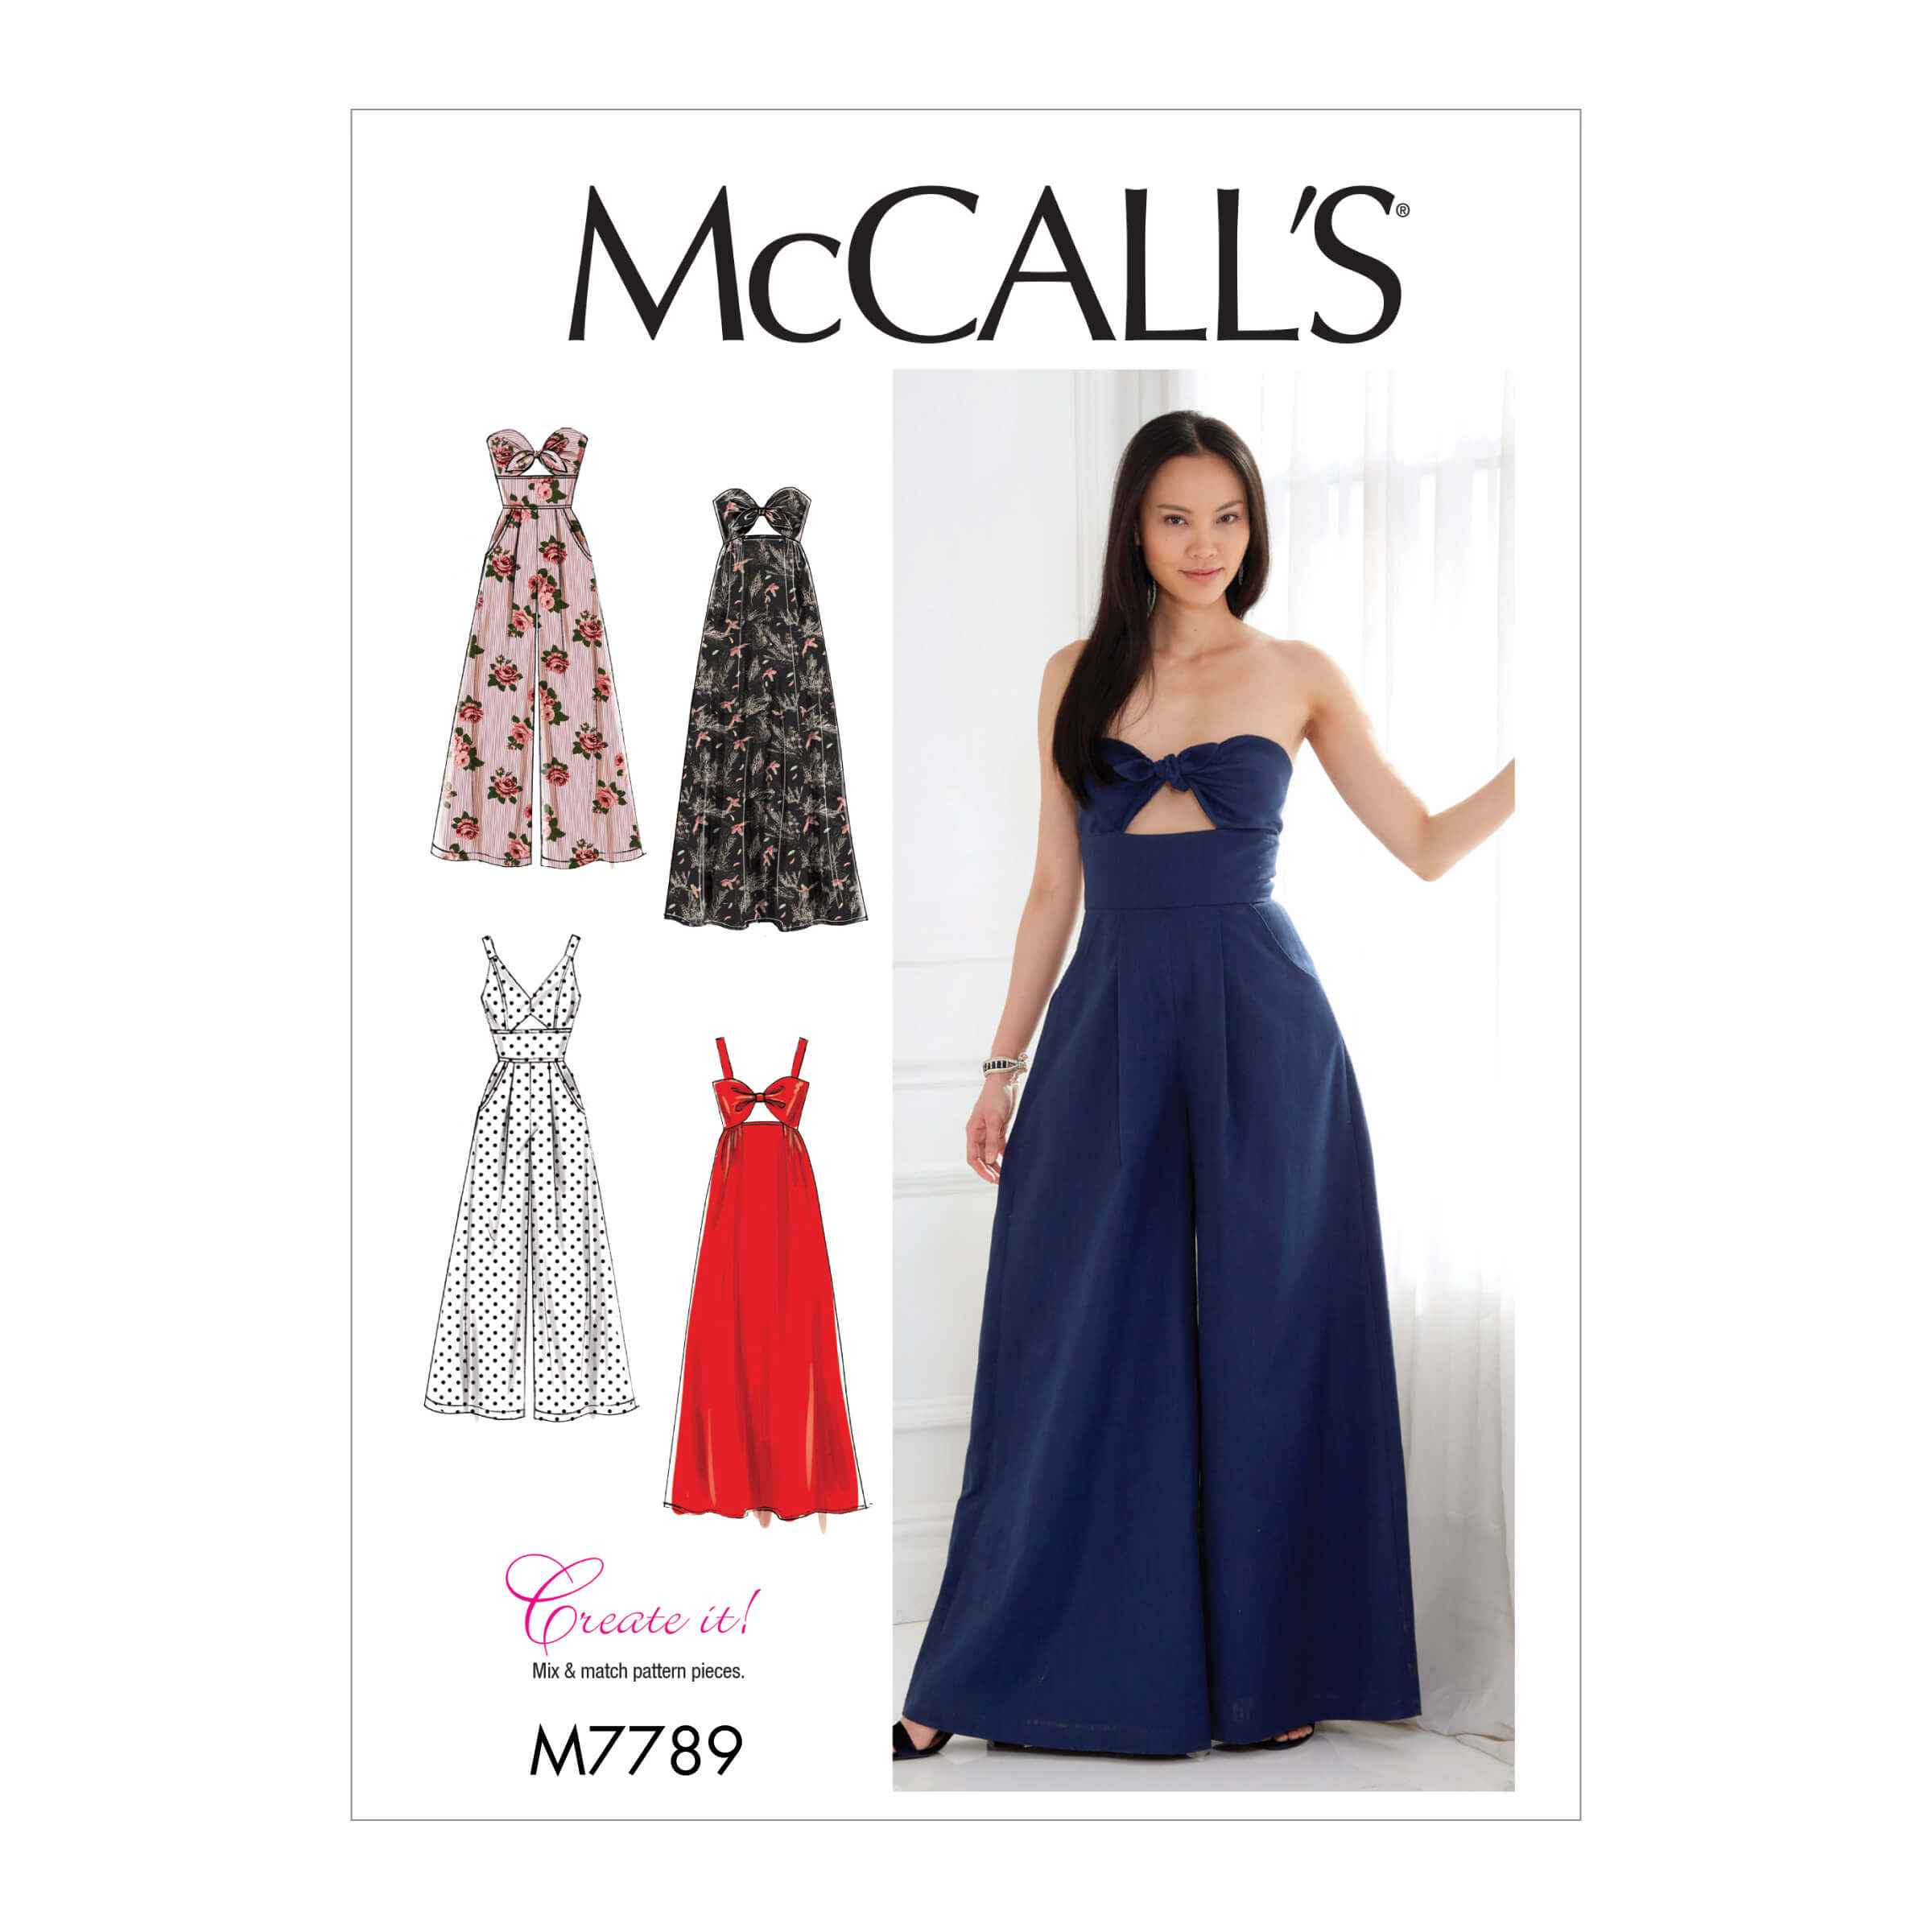 McCall's Sewing Patter M7789 Misses' Dresses and Jumpsuits